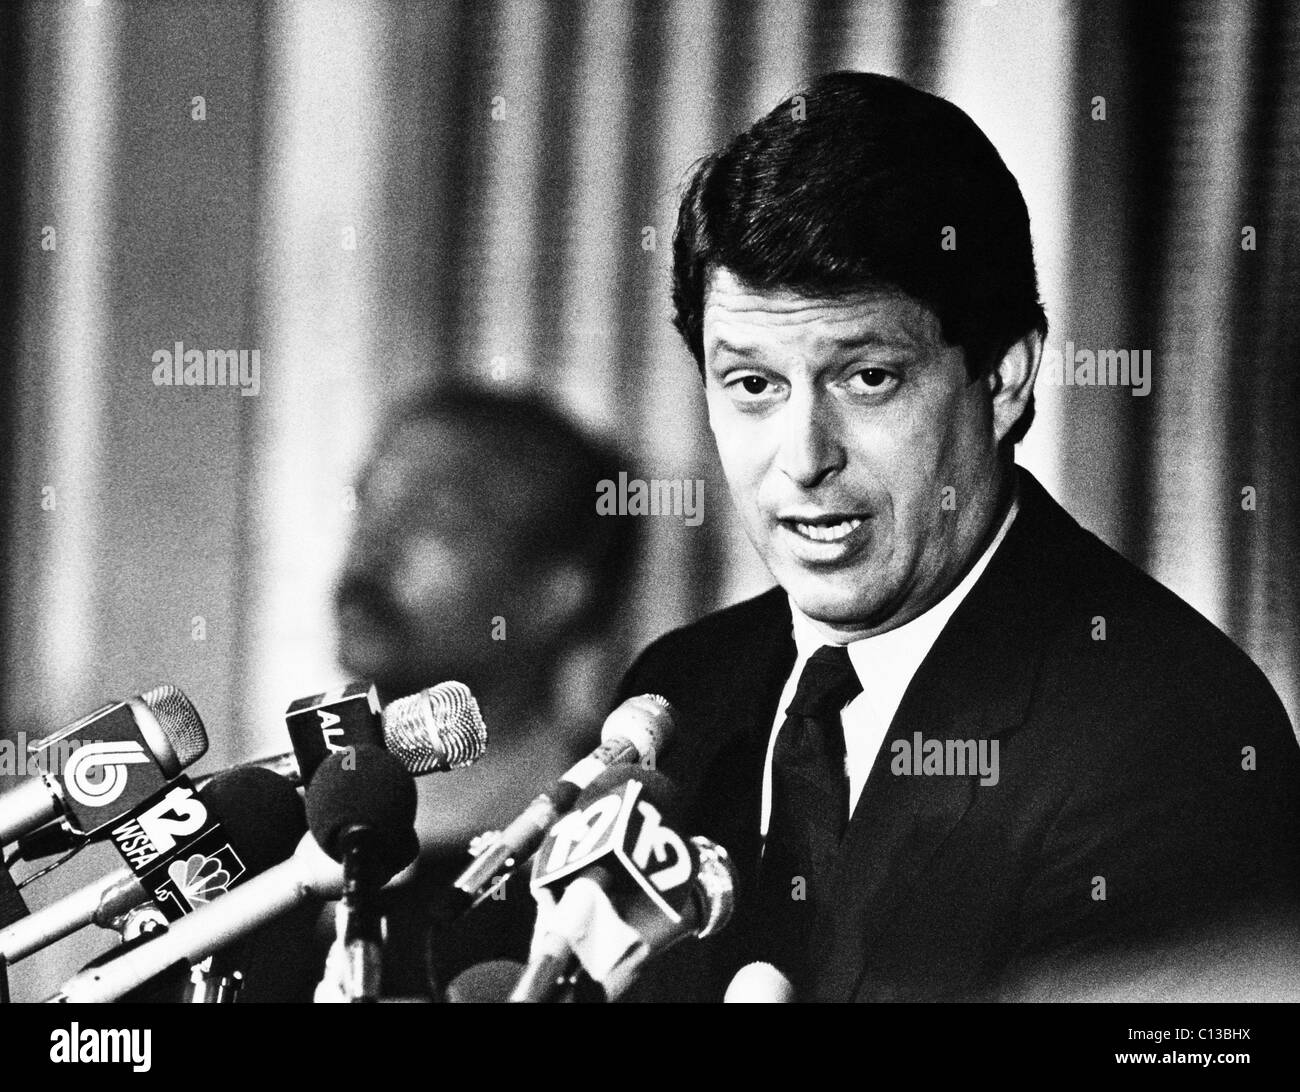 Al gore 1980s hi-res stock photography and images - Alamy